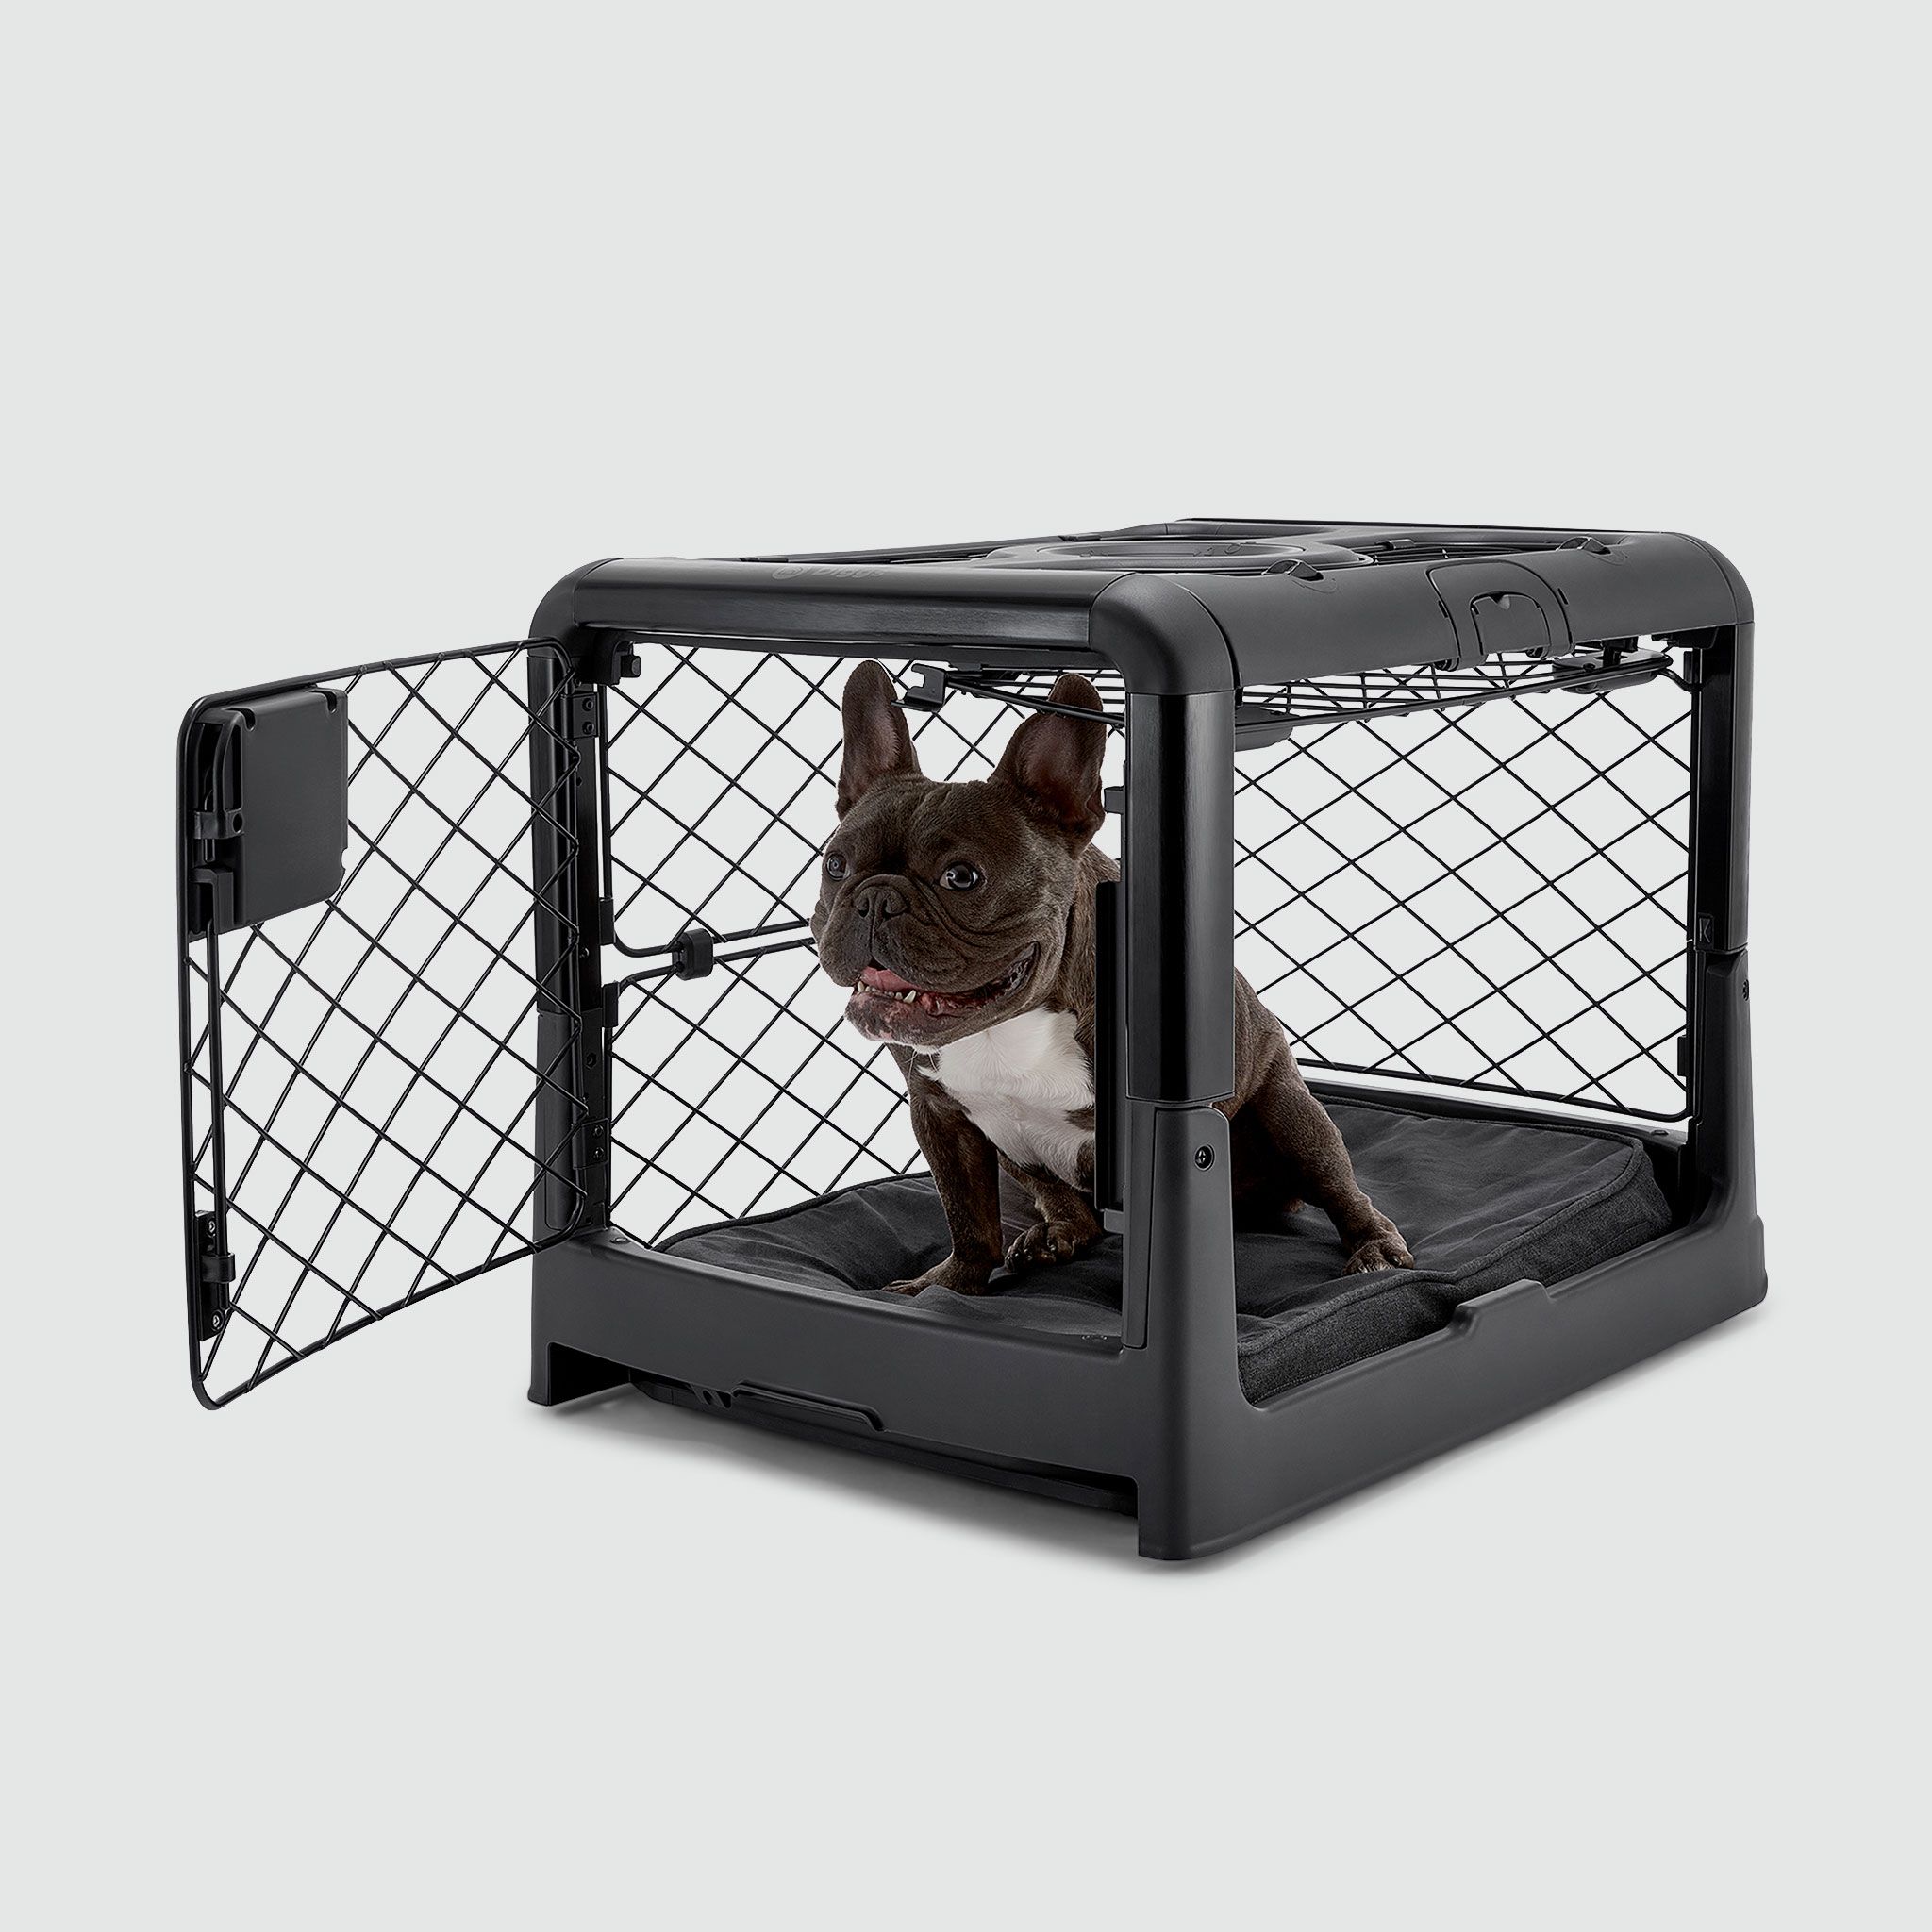 A small dog sitting inside of a dog crate